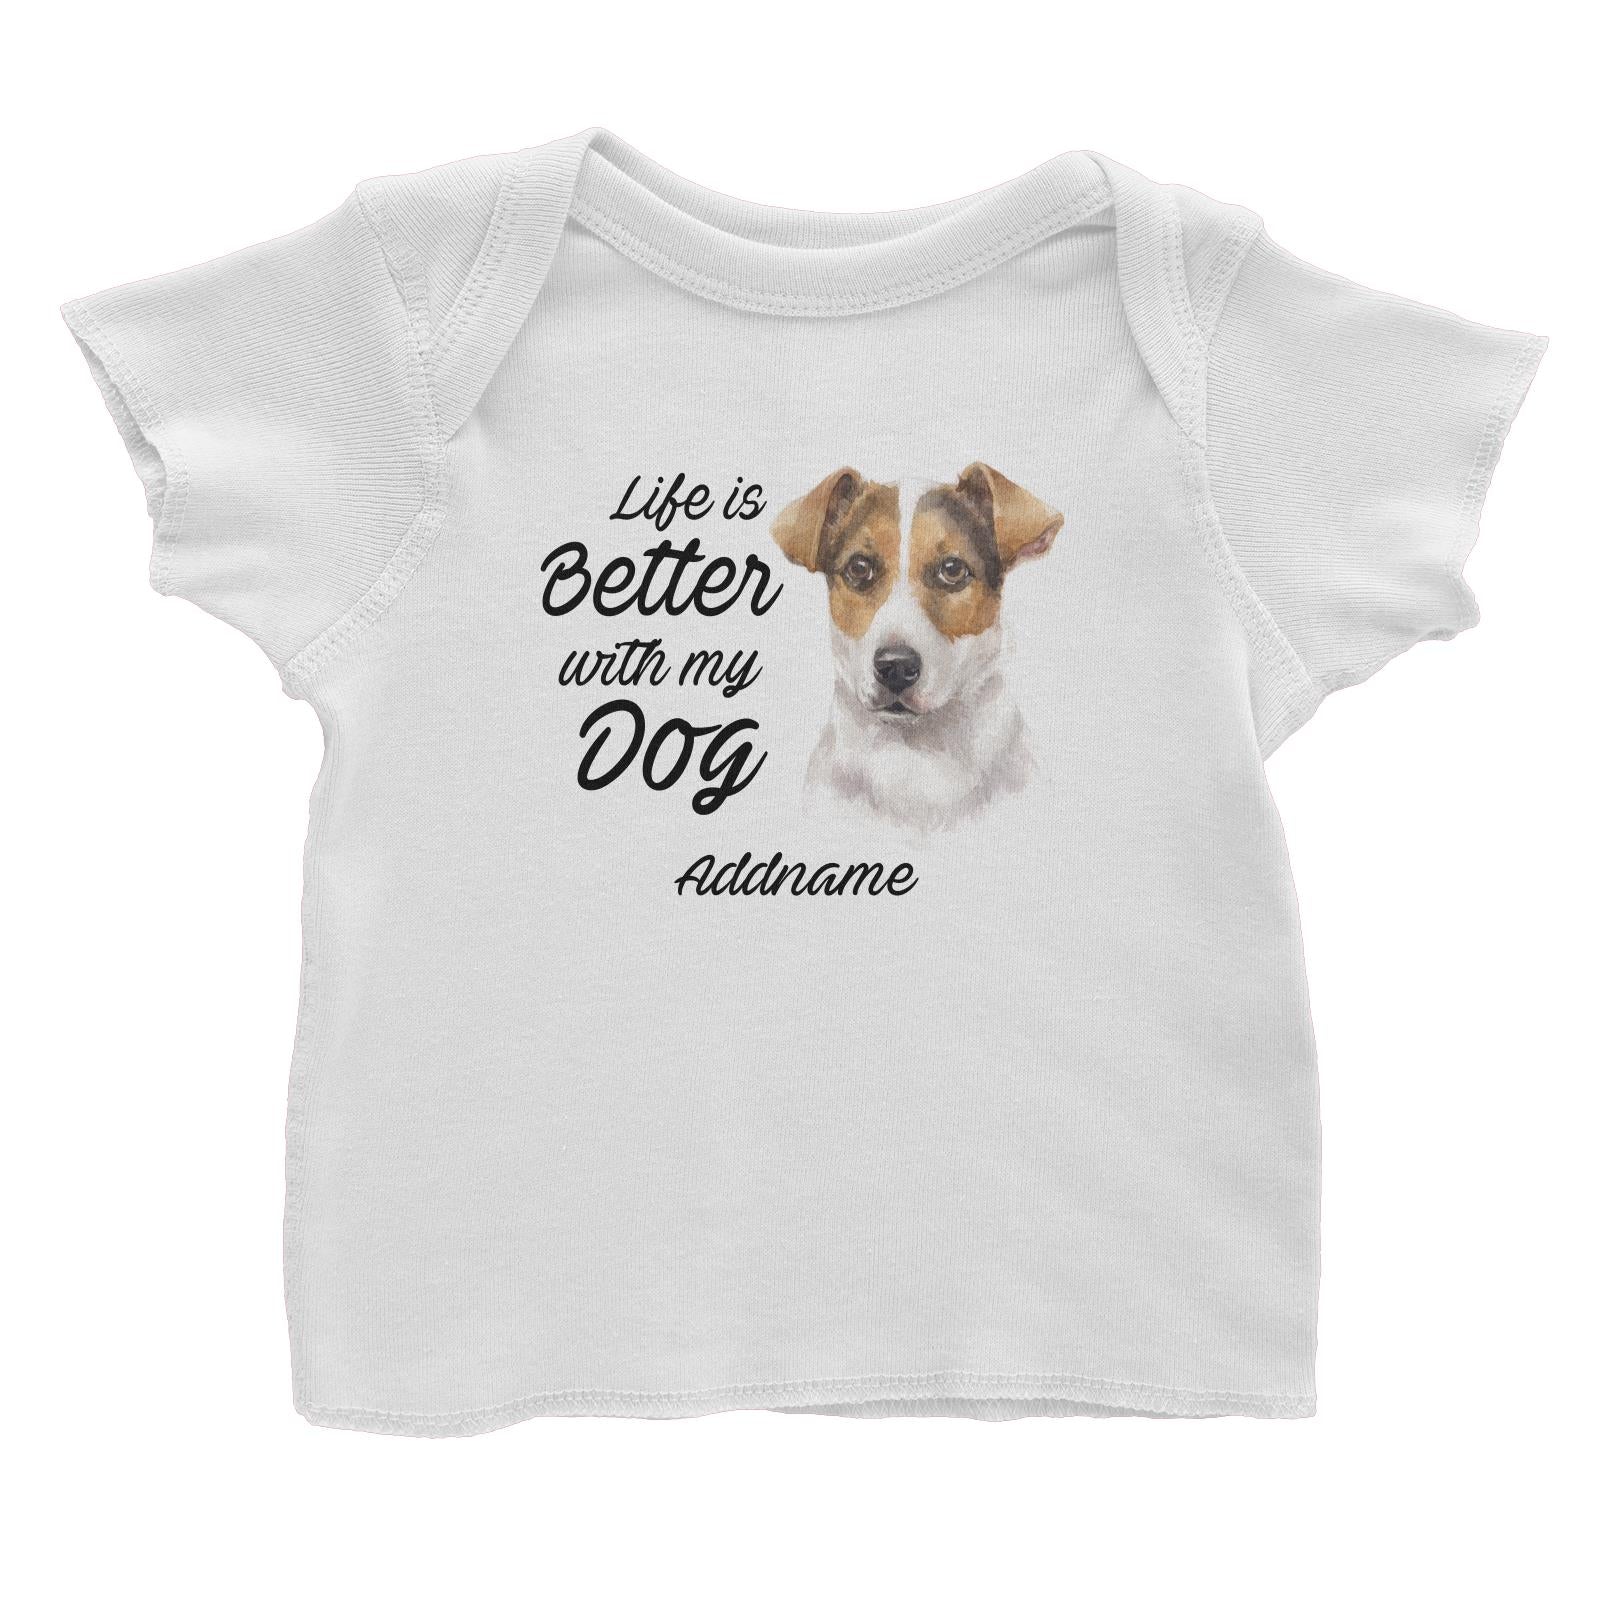 Watercolor Life is Better With My Dog Jack Russell Short Hair Addname Baby T-Shirt